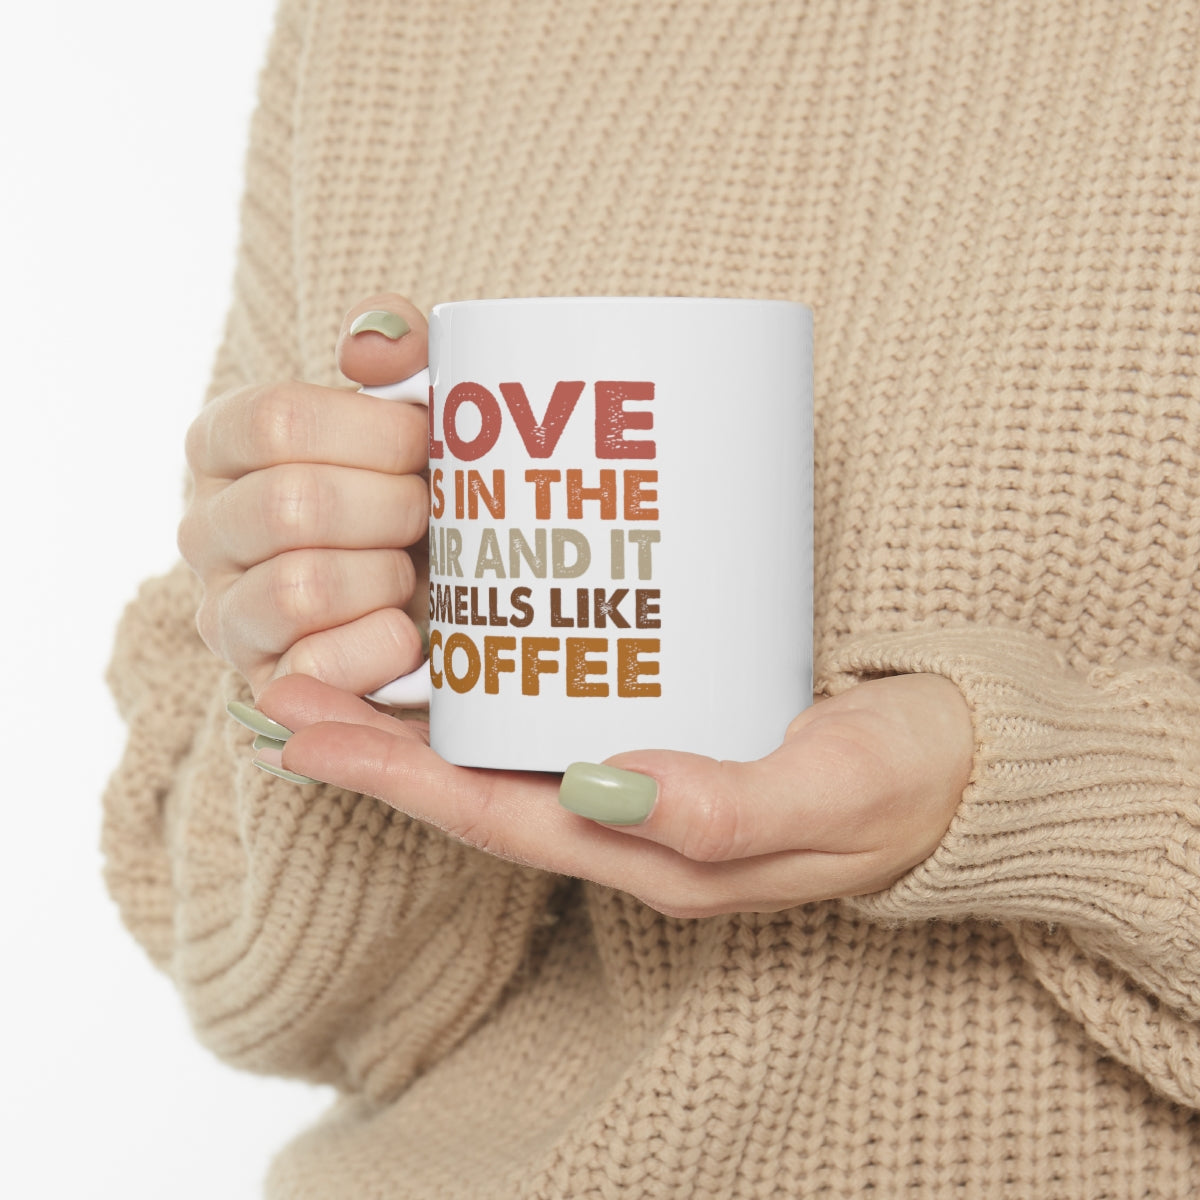 Love Is In the Air and It Smells Like Coffee Ceramic Mug